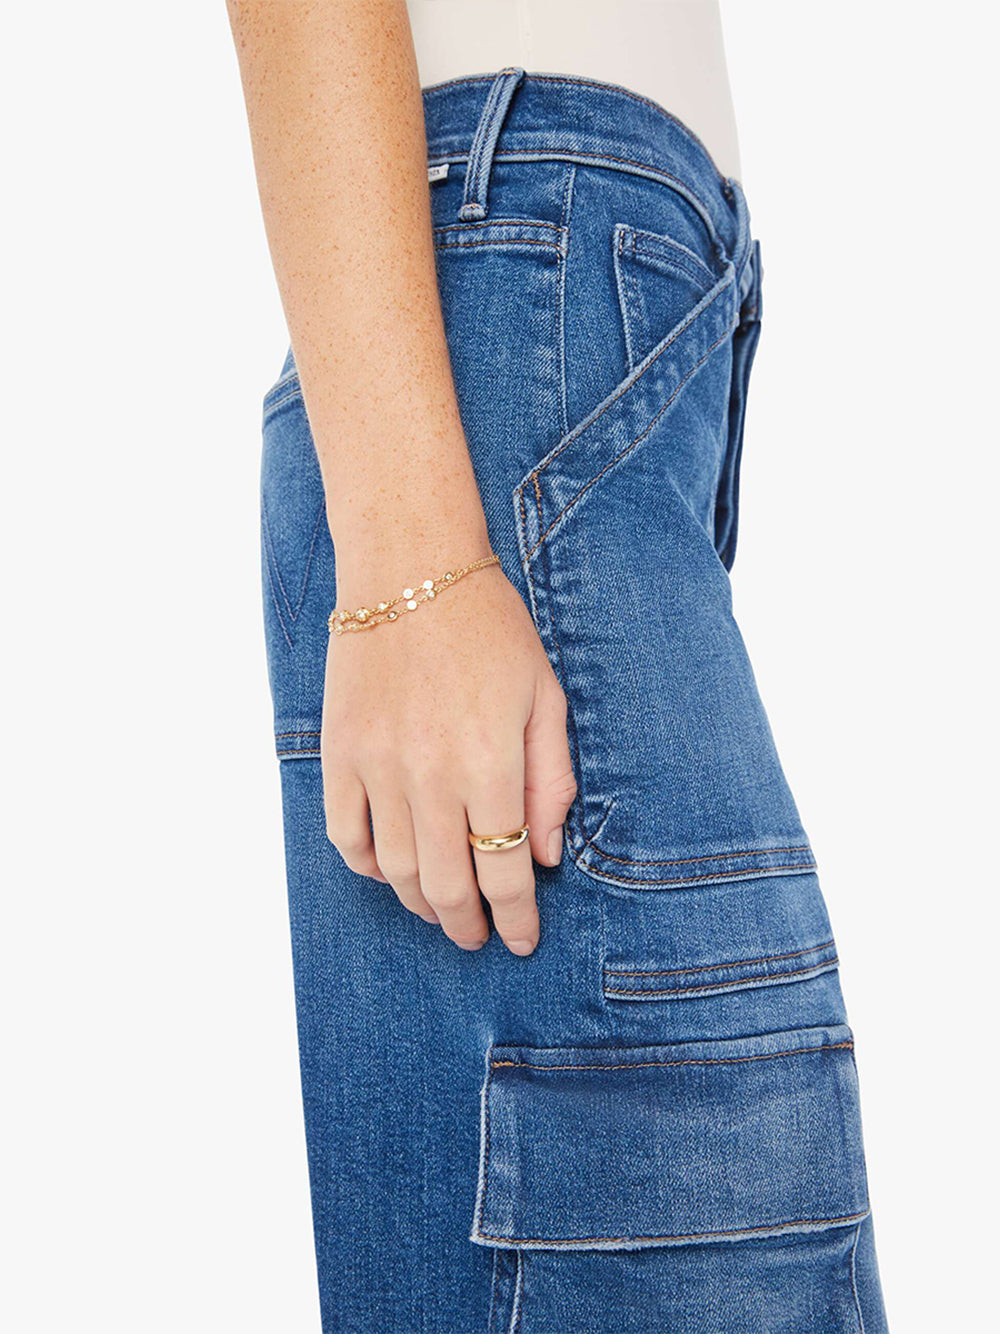 The Curbside Cargo Flood Jeans (Opposites Attract)